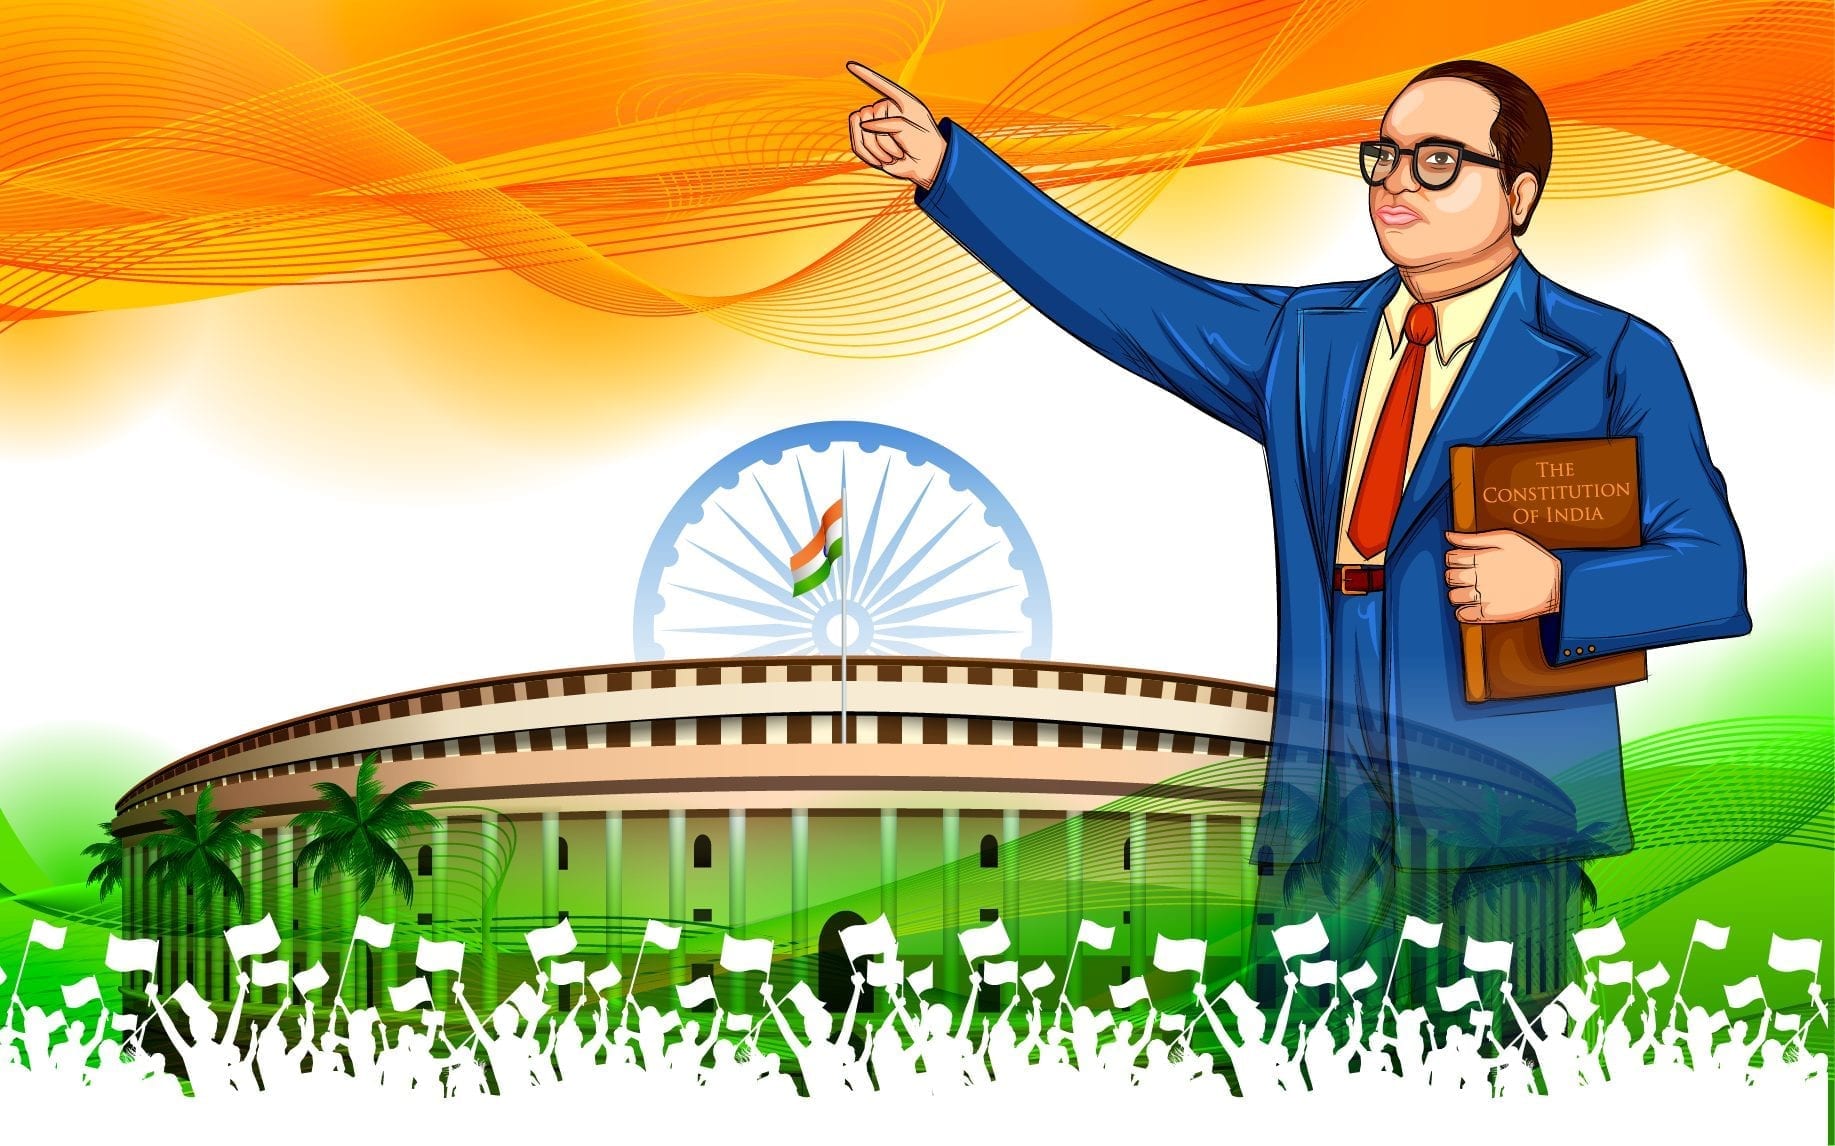 National Constitution Day Drawing, 26th Nov | National Law Day | Samvidhan  Diwas Poster drawing | Easy drawings for kids, Constitution day, Poster  drawing